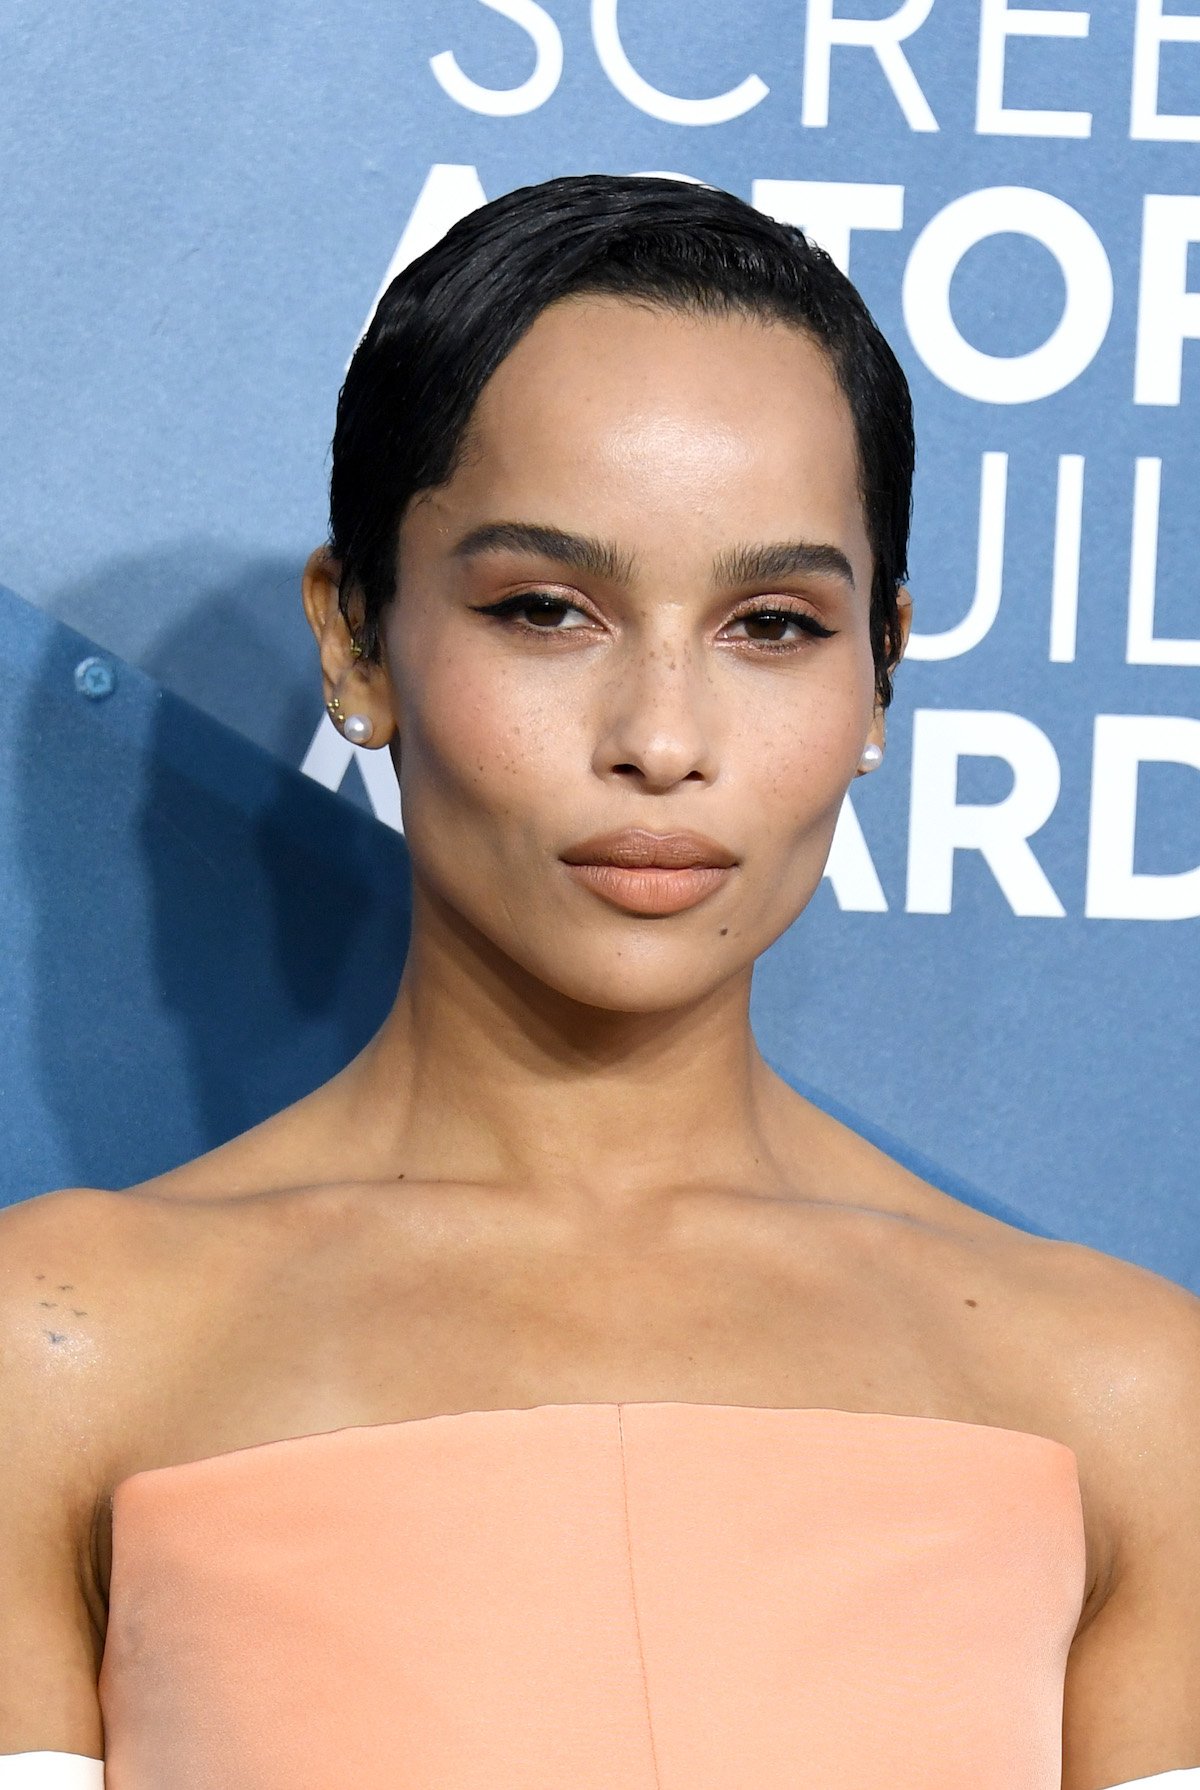 Zoë Kravitz attends the 26th Annual Screen Actors Guild Awards at The Shrine Auditorium on January 19, 2020 in Los Angeles, California.